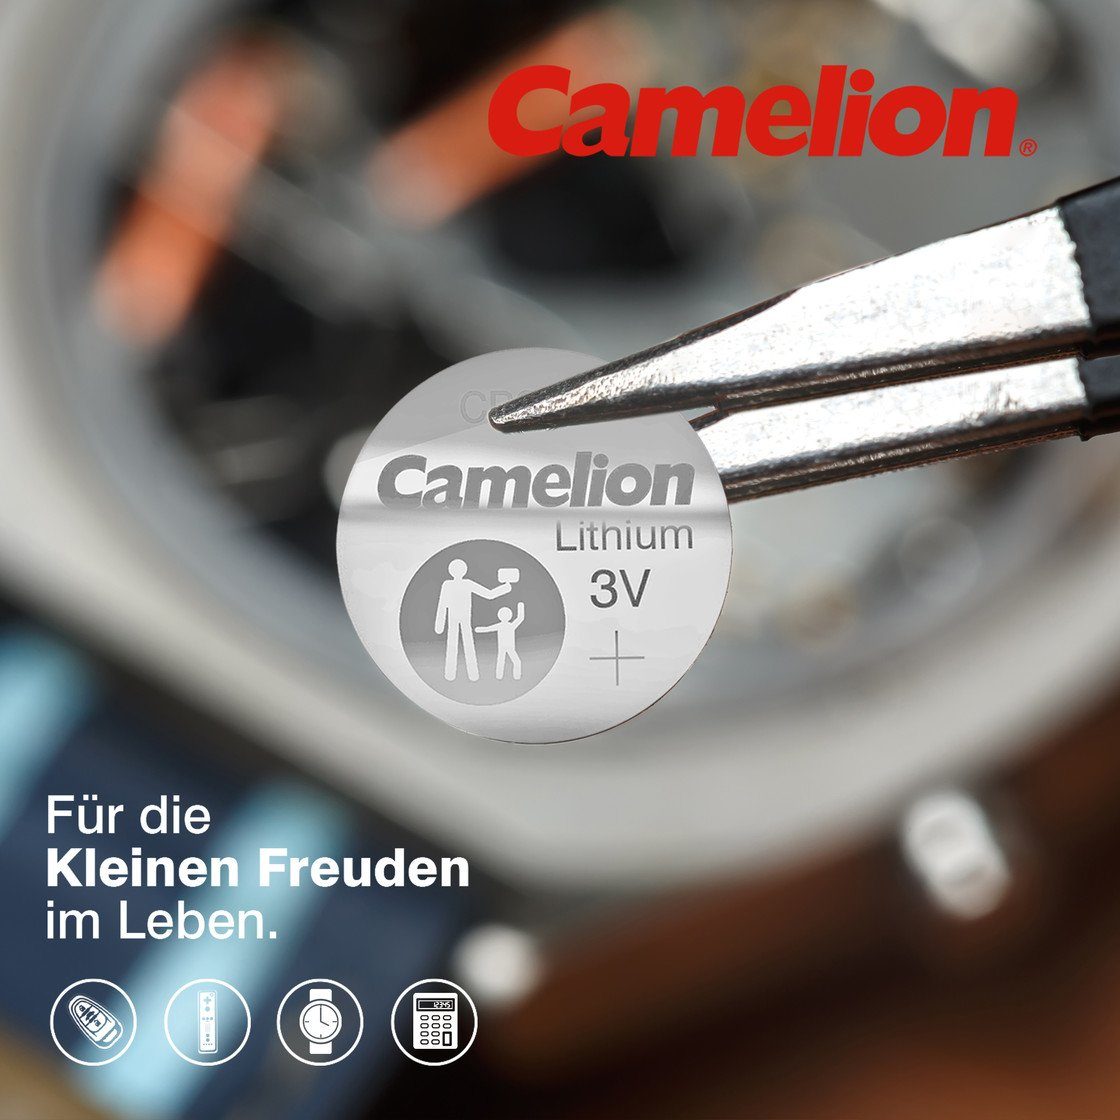 Camelion – Blister Alarmanlage ® 3 gws-powercell CR2477 Lithium Knopfzelle ELECTRONICS LUPUS V